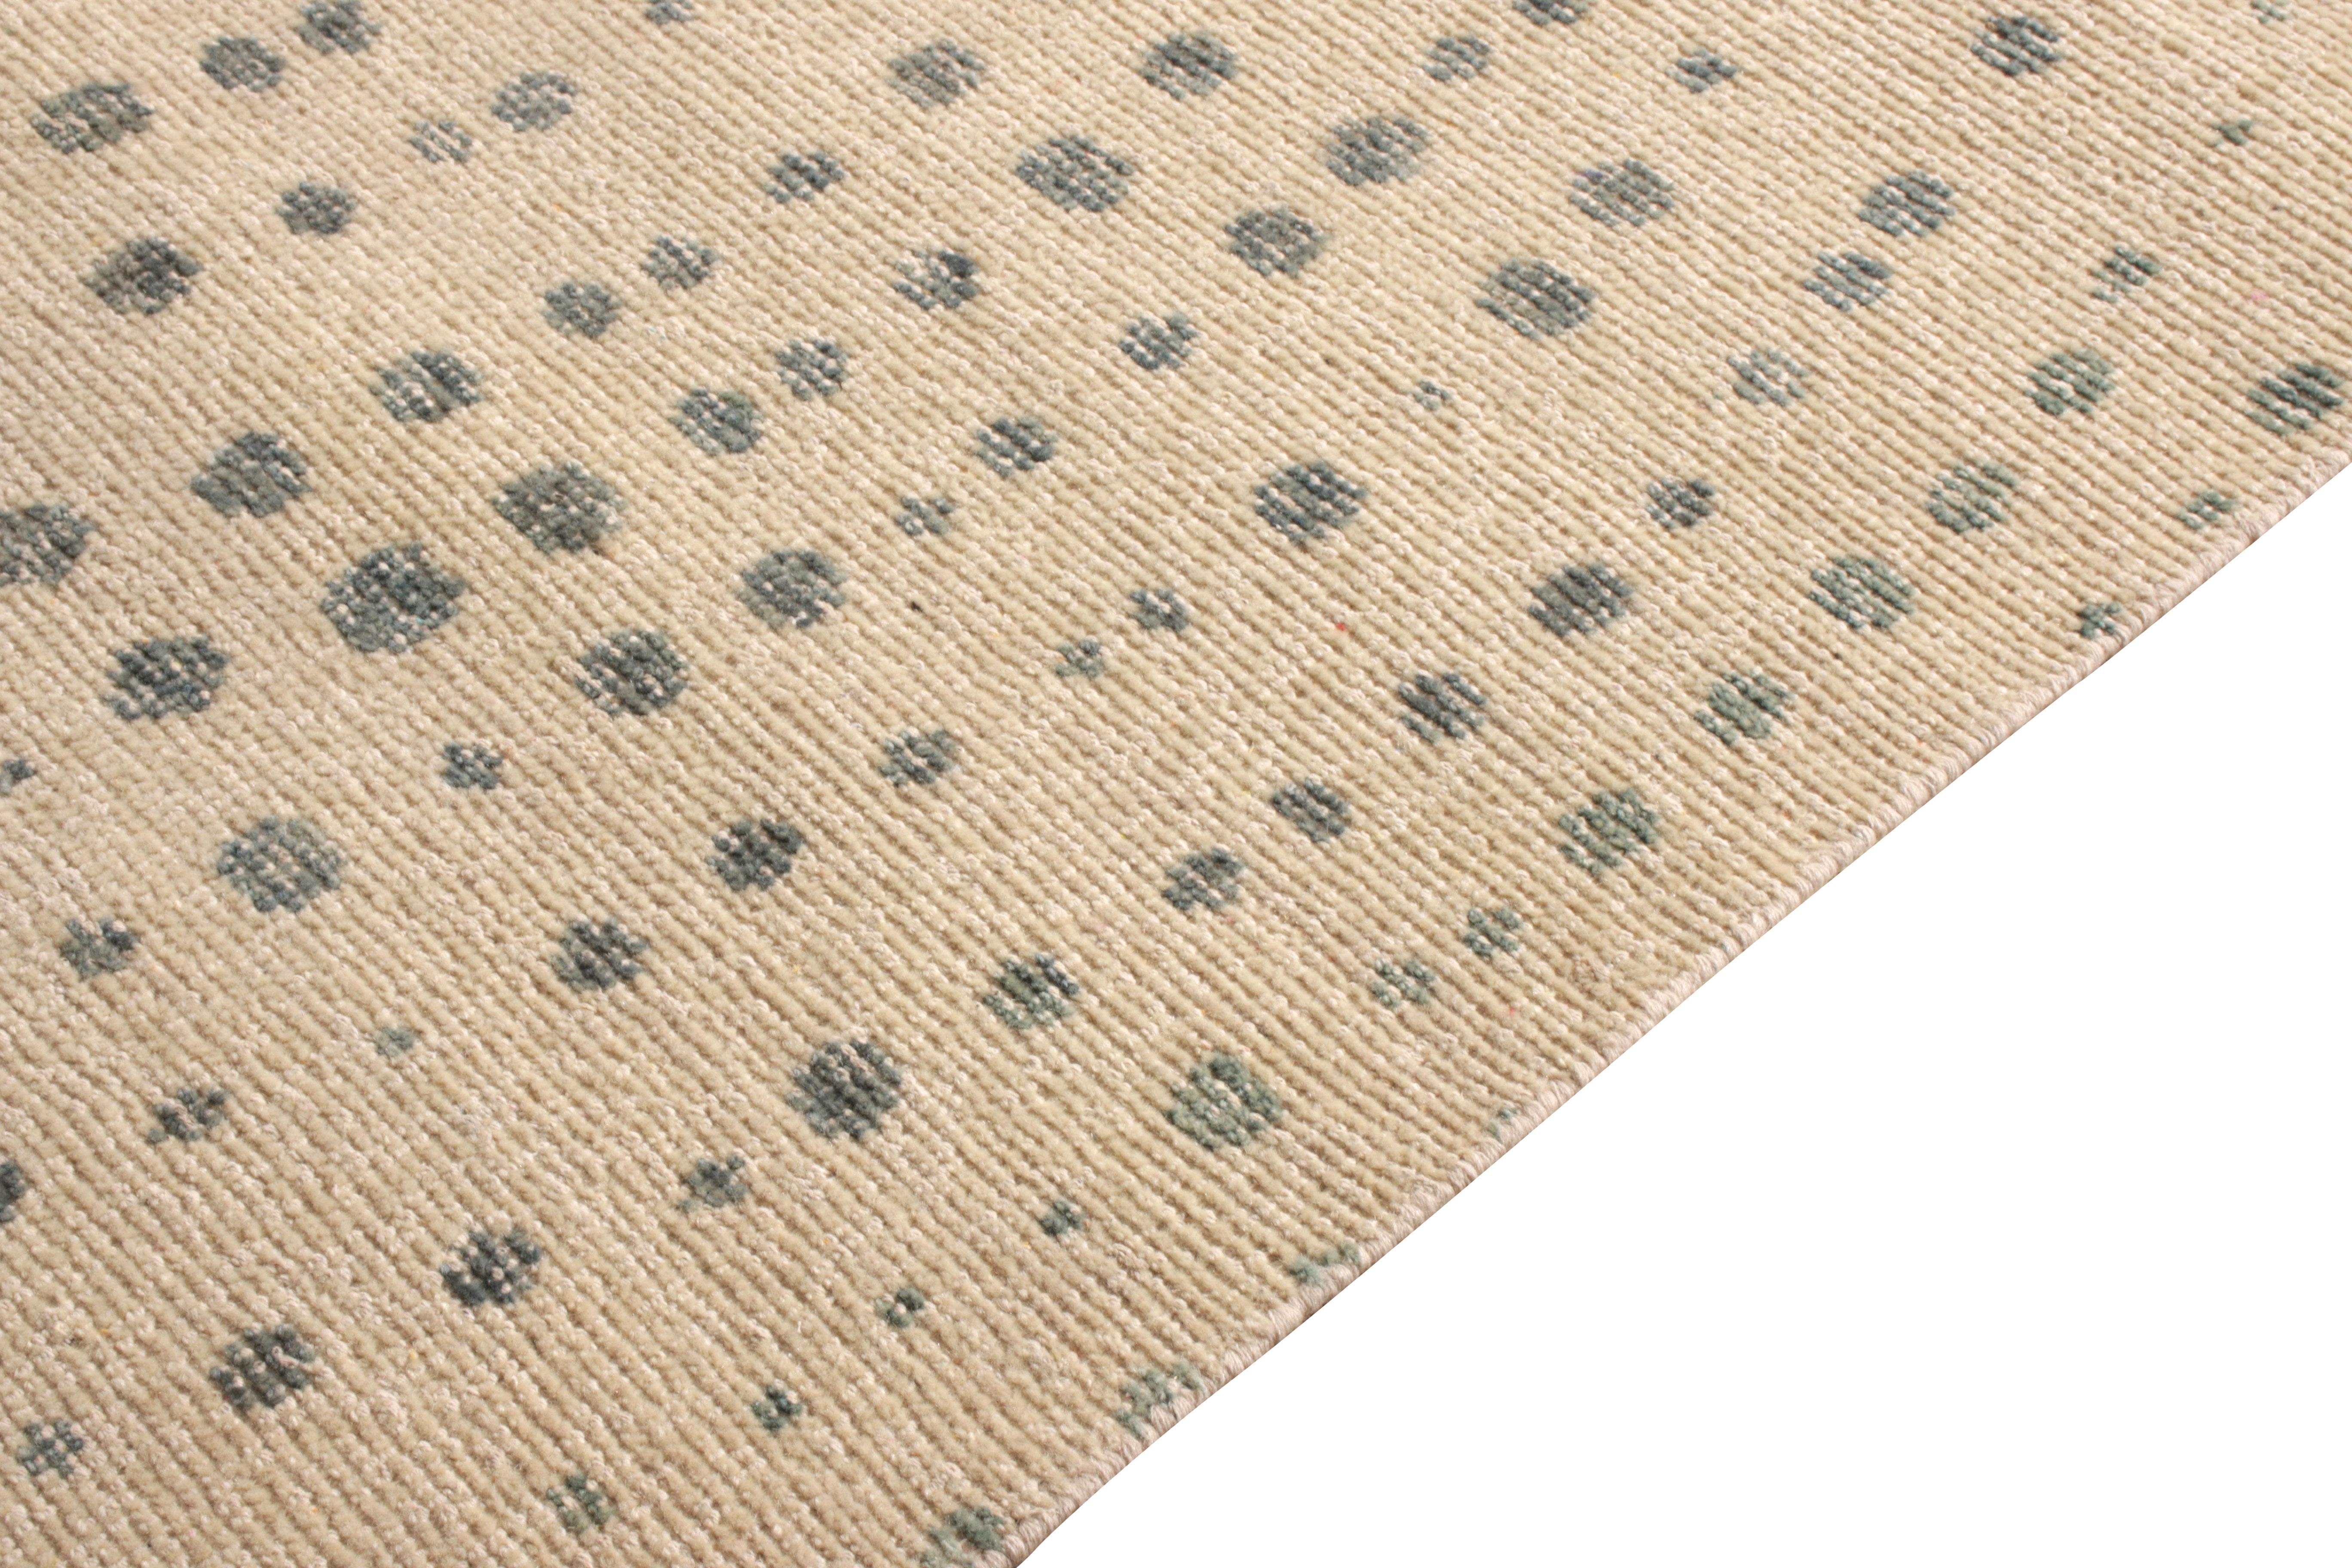 Indian Rug & Kilim’s Distressed Style Rug in Beige, Gray Dots Pattern For Sale